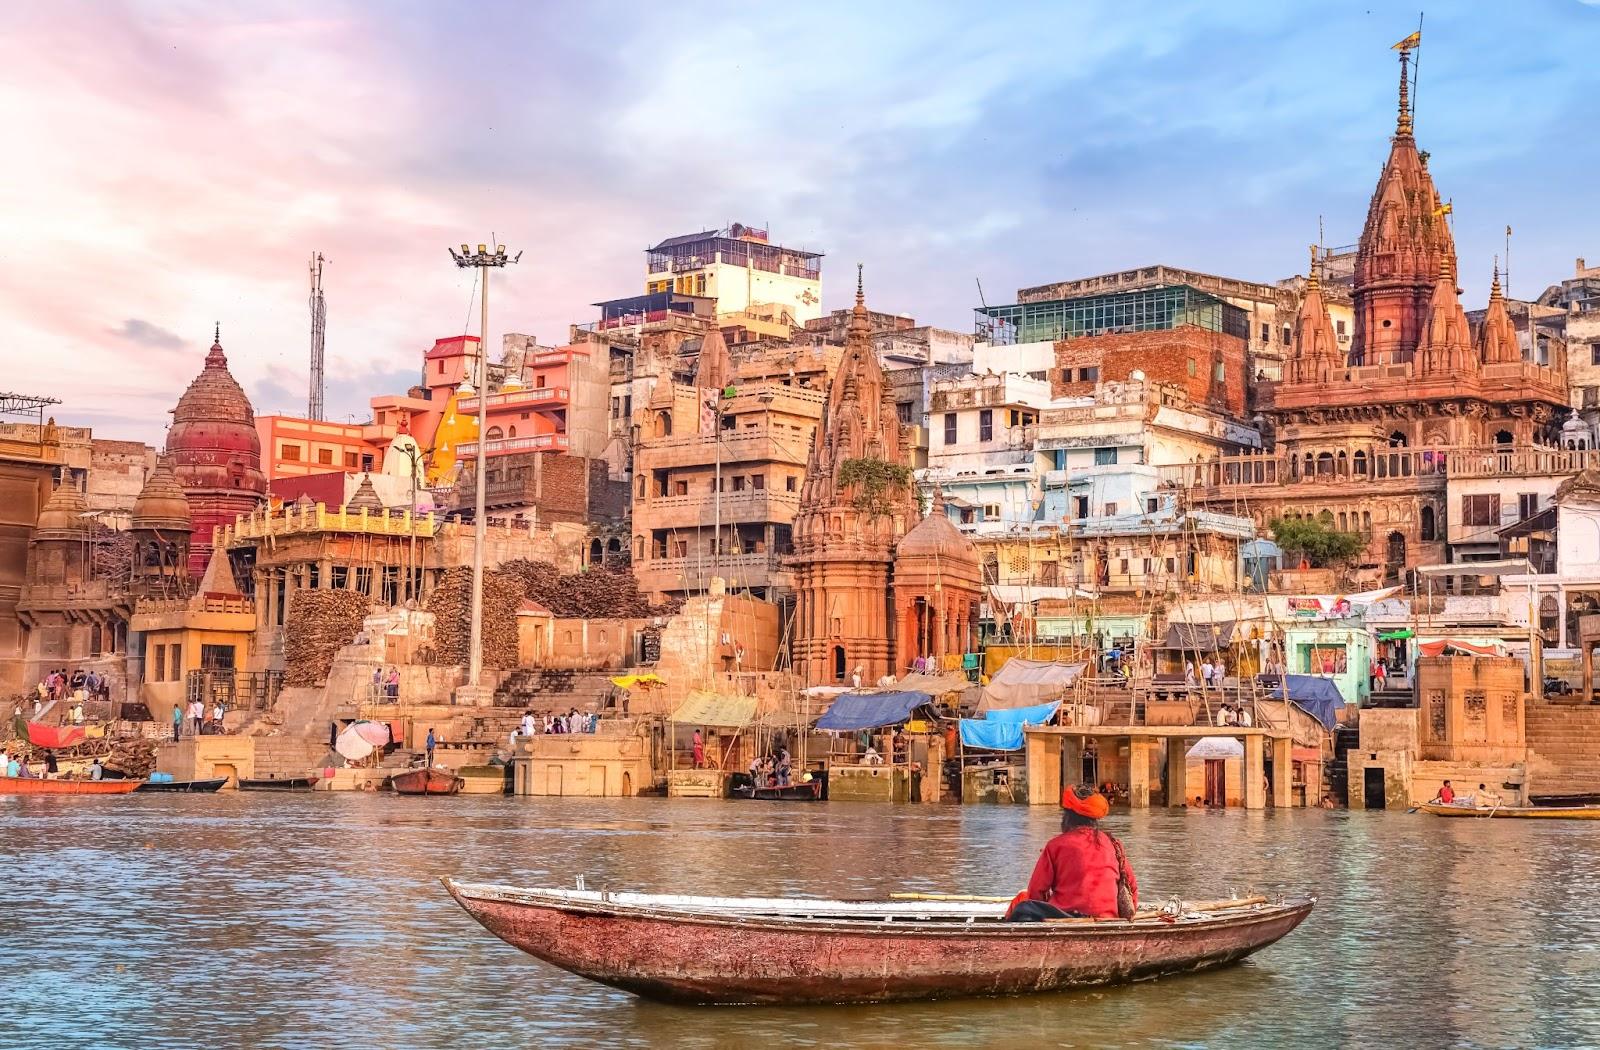 Ancient Varanasi city architecture at sunset with view of sadhu baba enjoying a boat ride on river Ganges